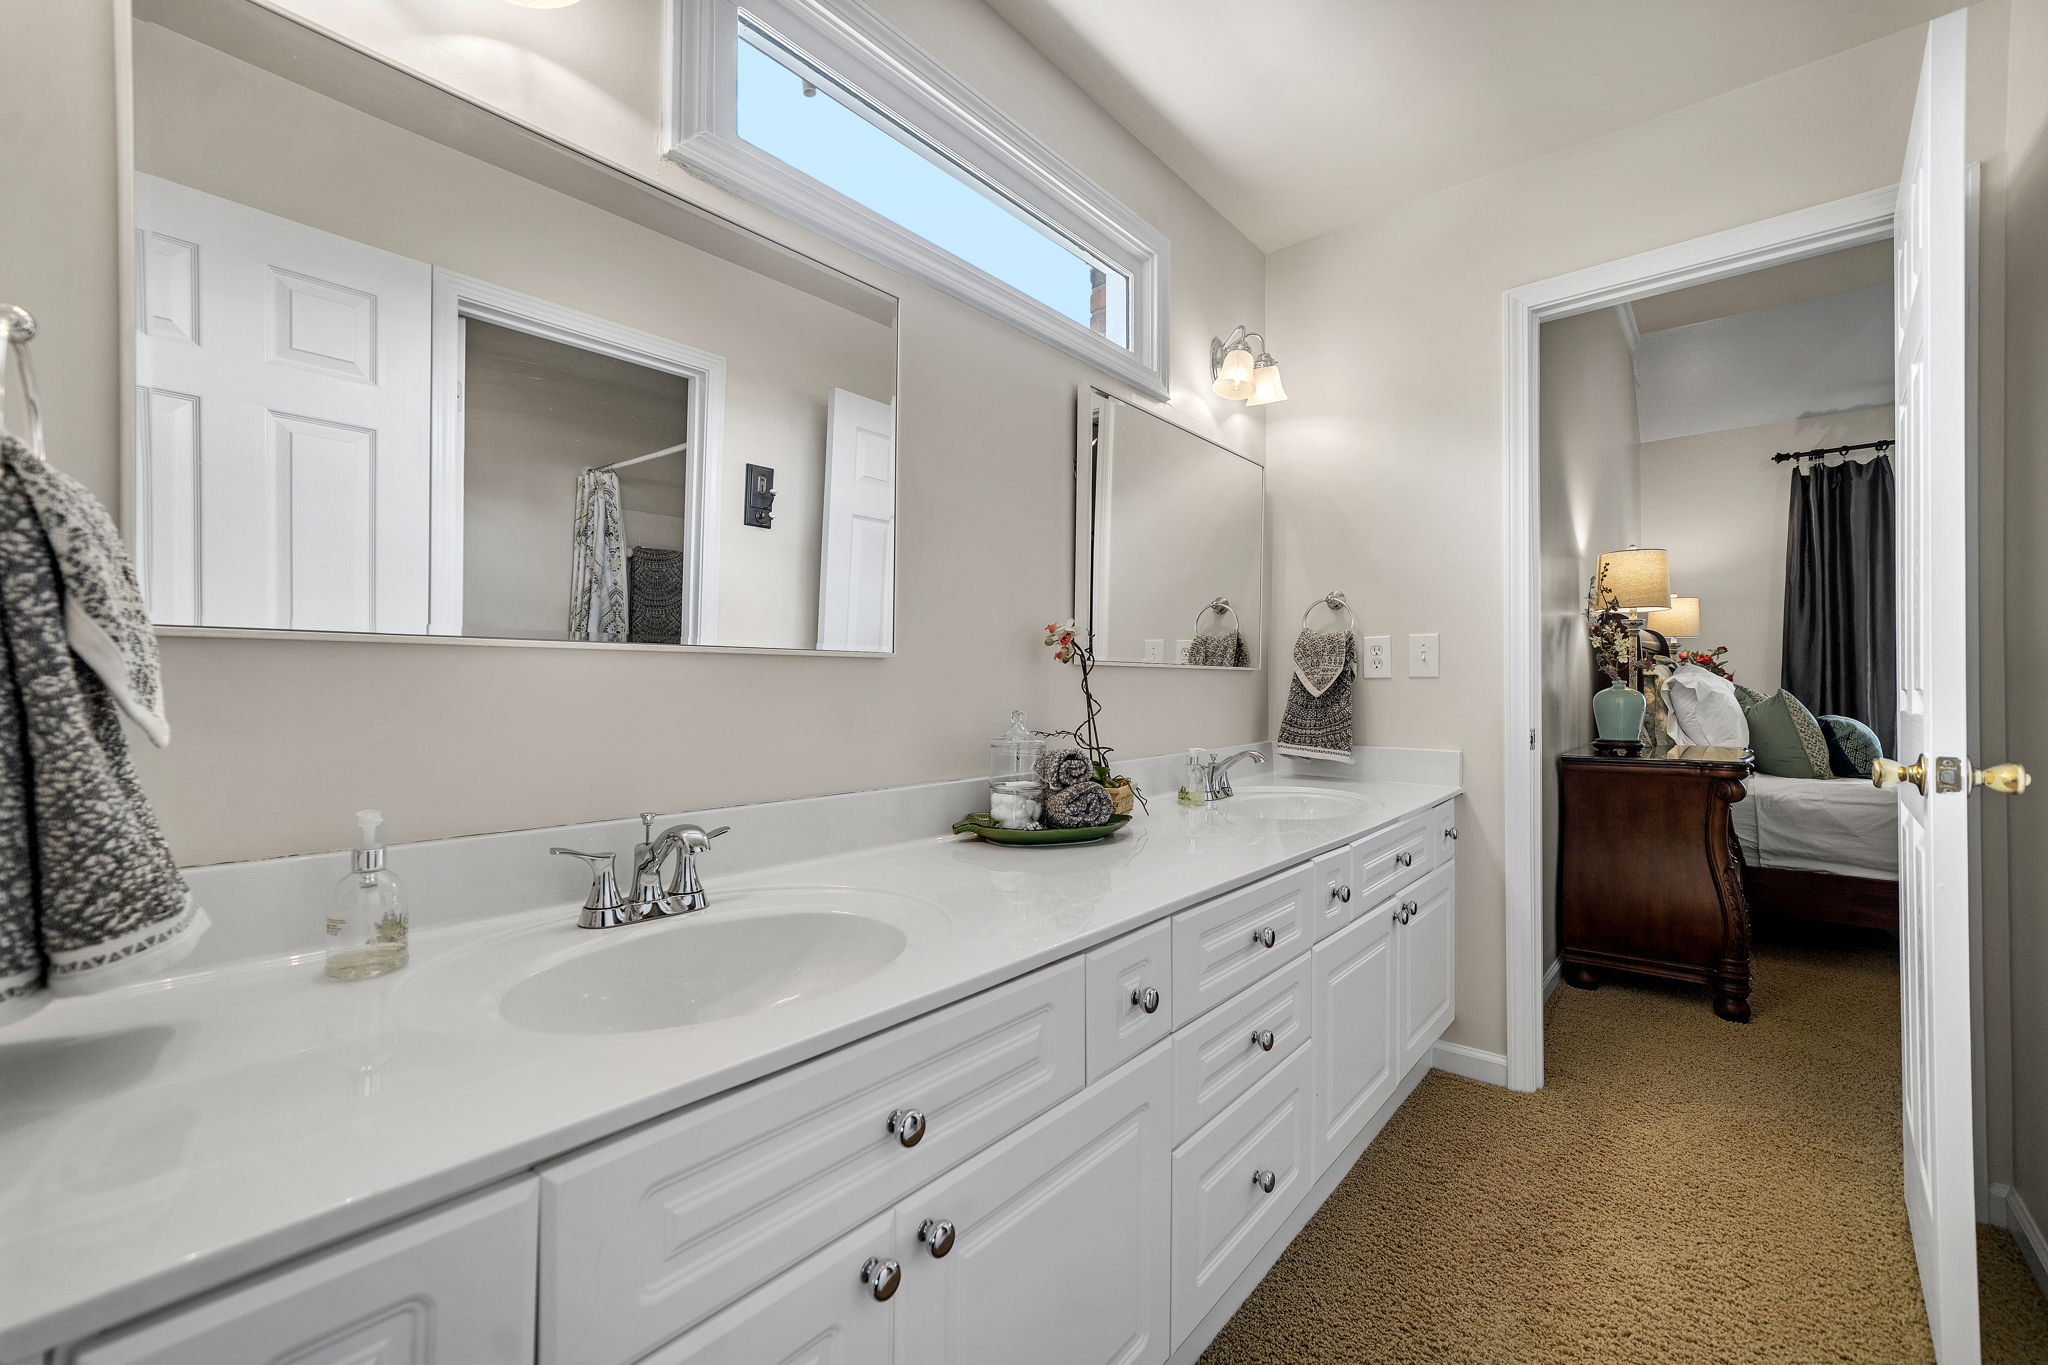 Jack/Jill with has extra-long double vanity and seperate commode/shower area. Perfect for sharing!